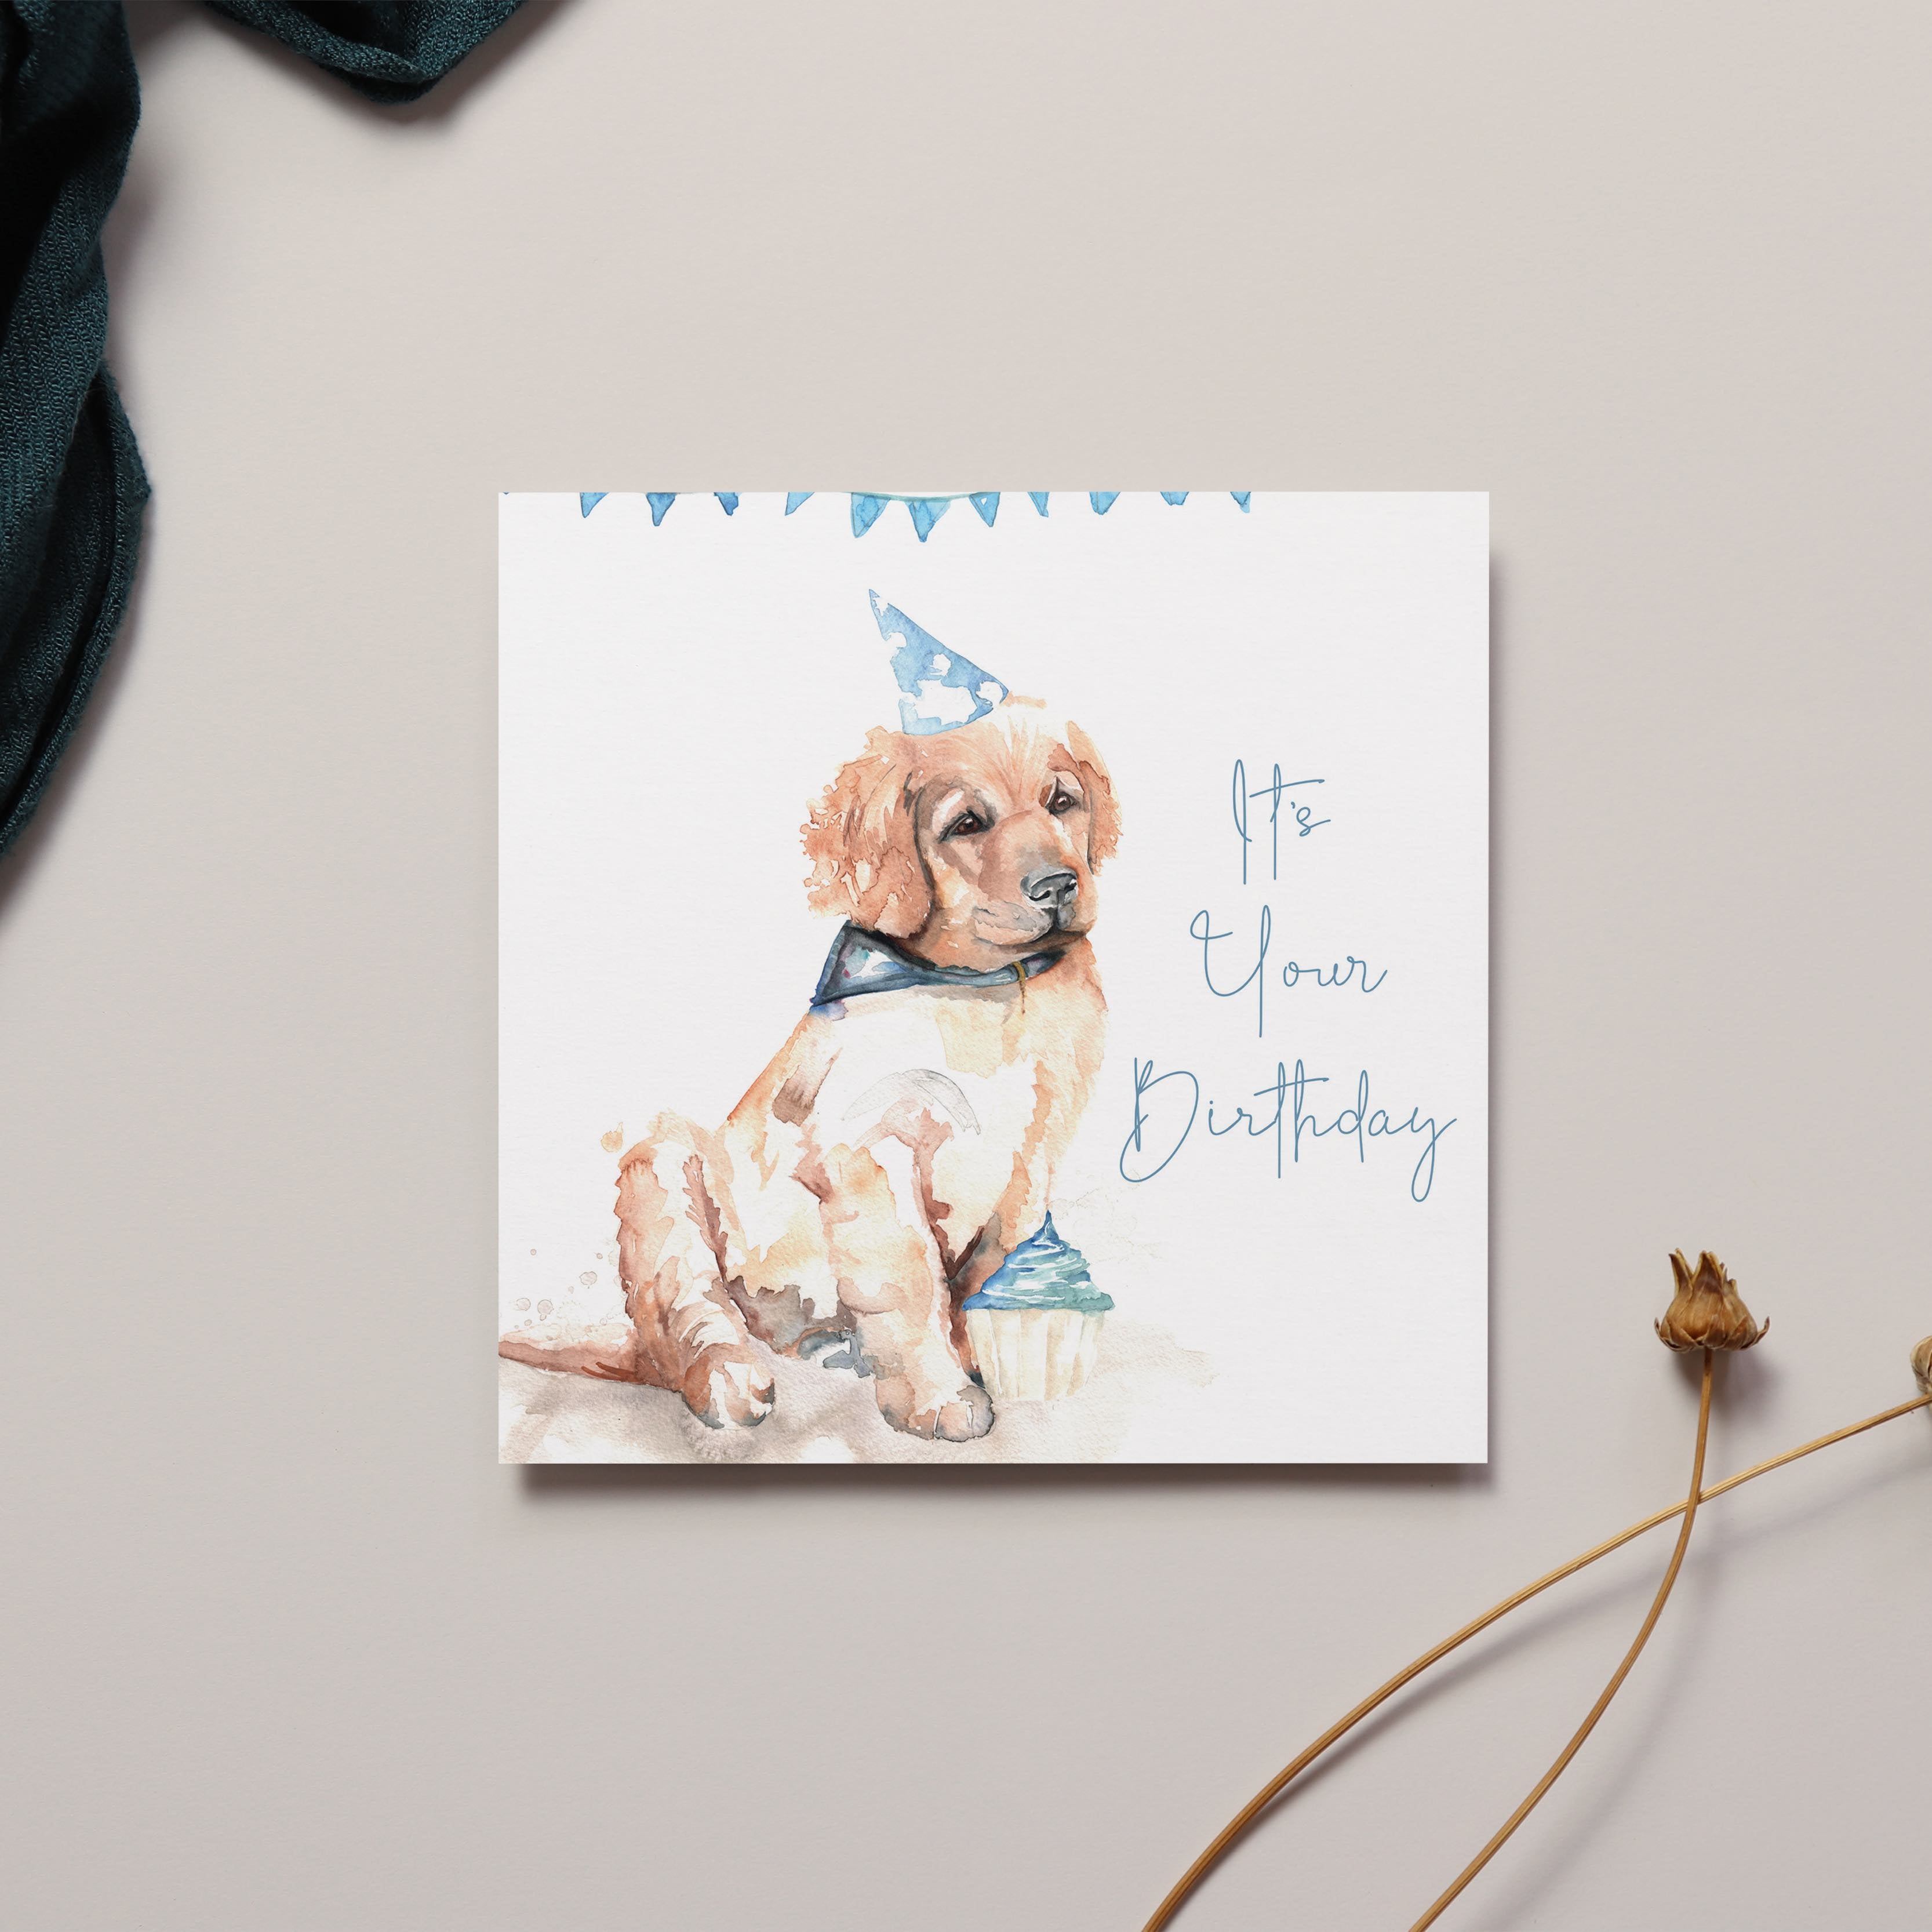 It's Your Birthday Dog Sentiment Card